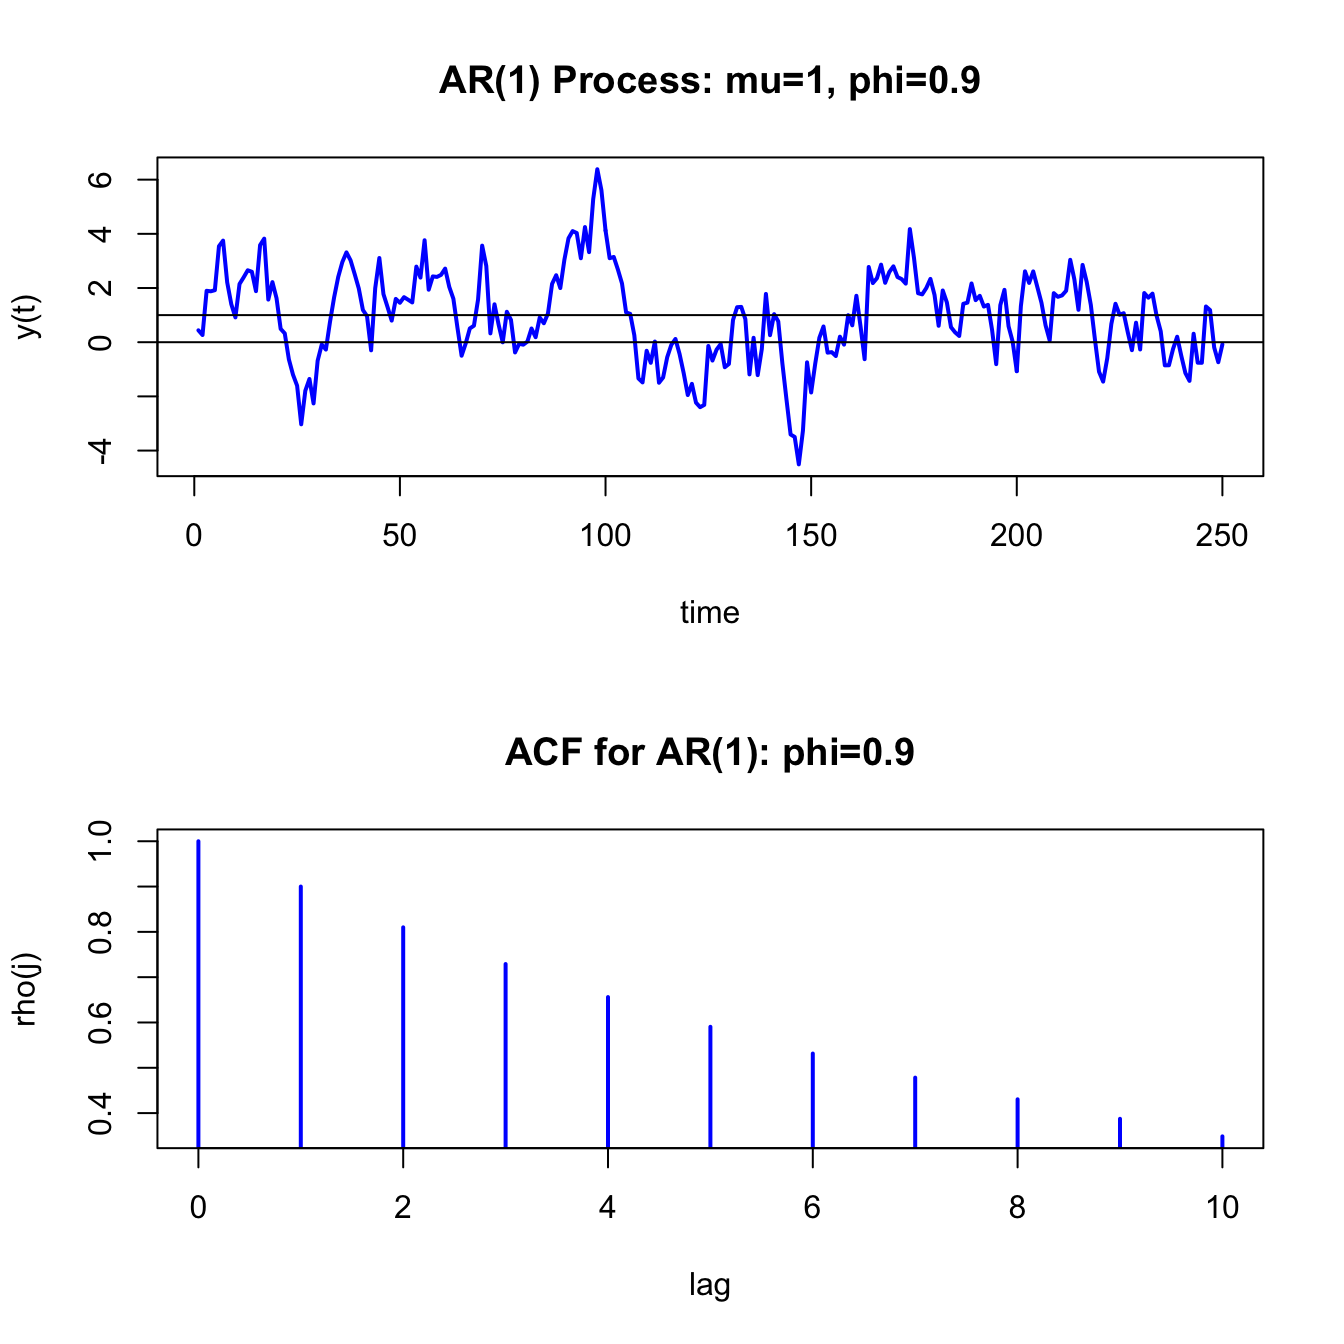 Simulated values and ACF from AR(1) model with $\mu=1,\phi=0.9$ and $\sigma_{\varepsilon}^{2}=1$